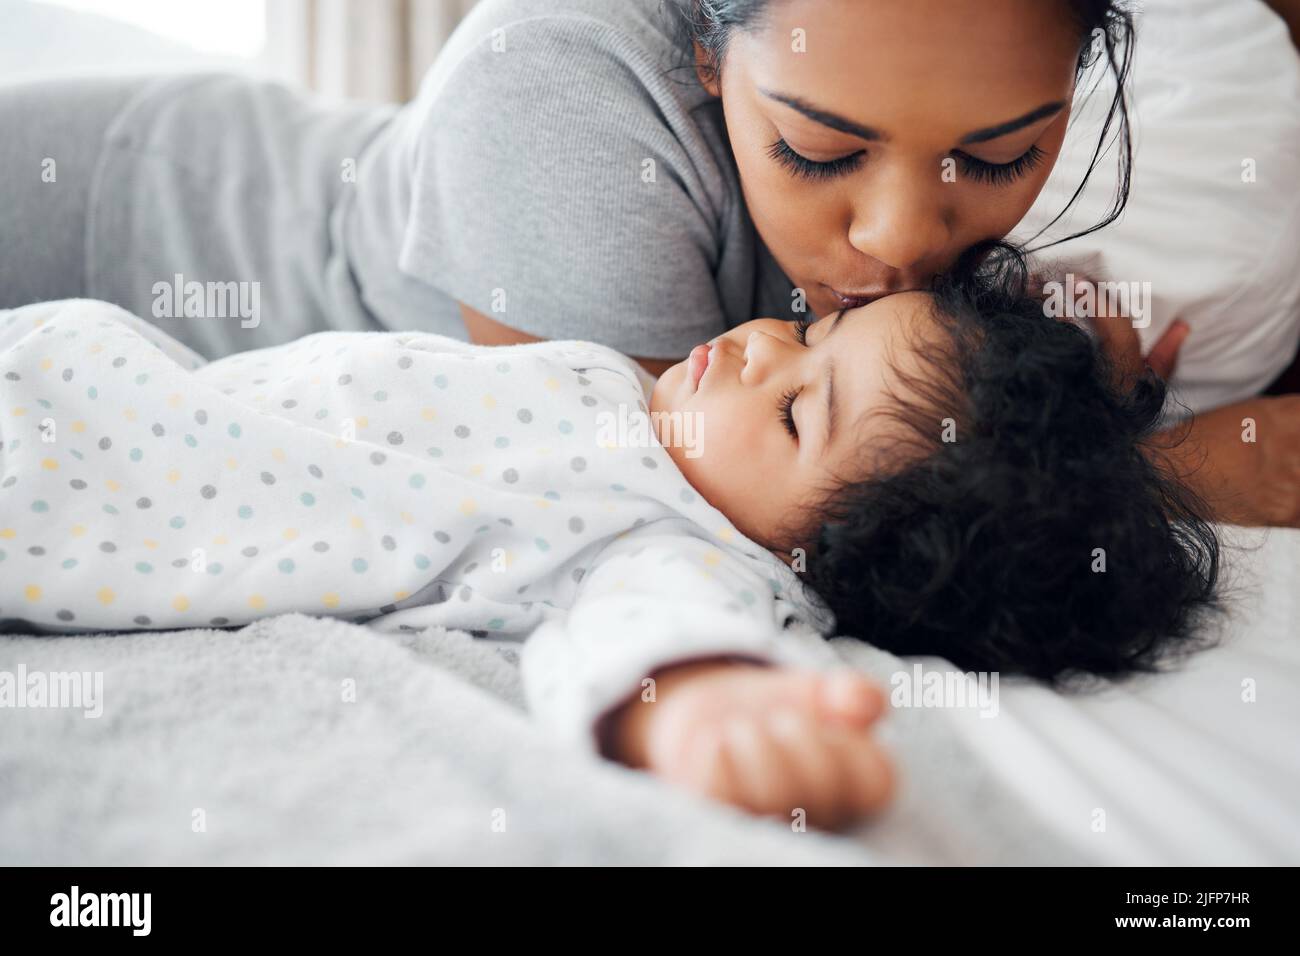 What a sweetheart. Shot of a young mother kissing her sleeping baby. Stock Photo